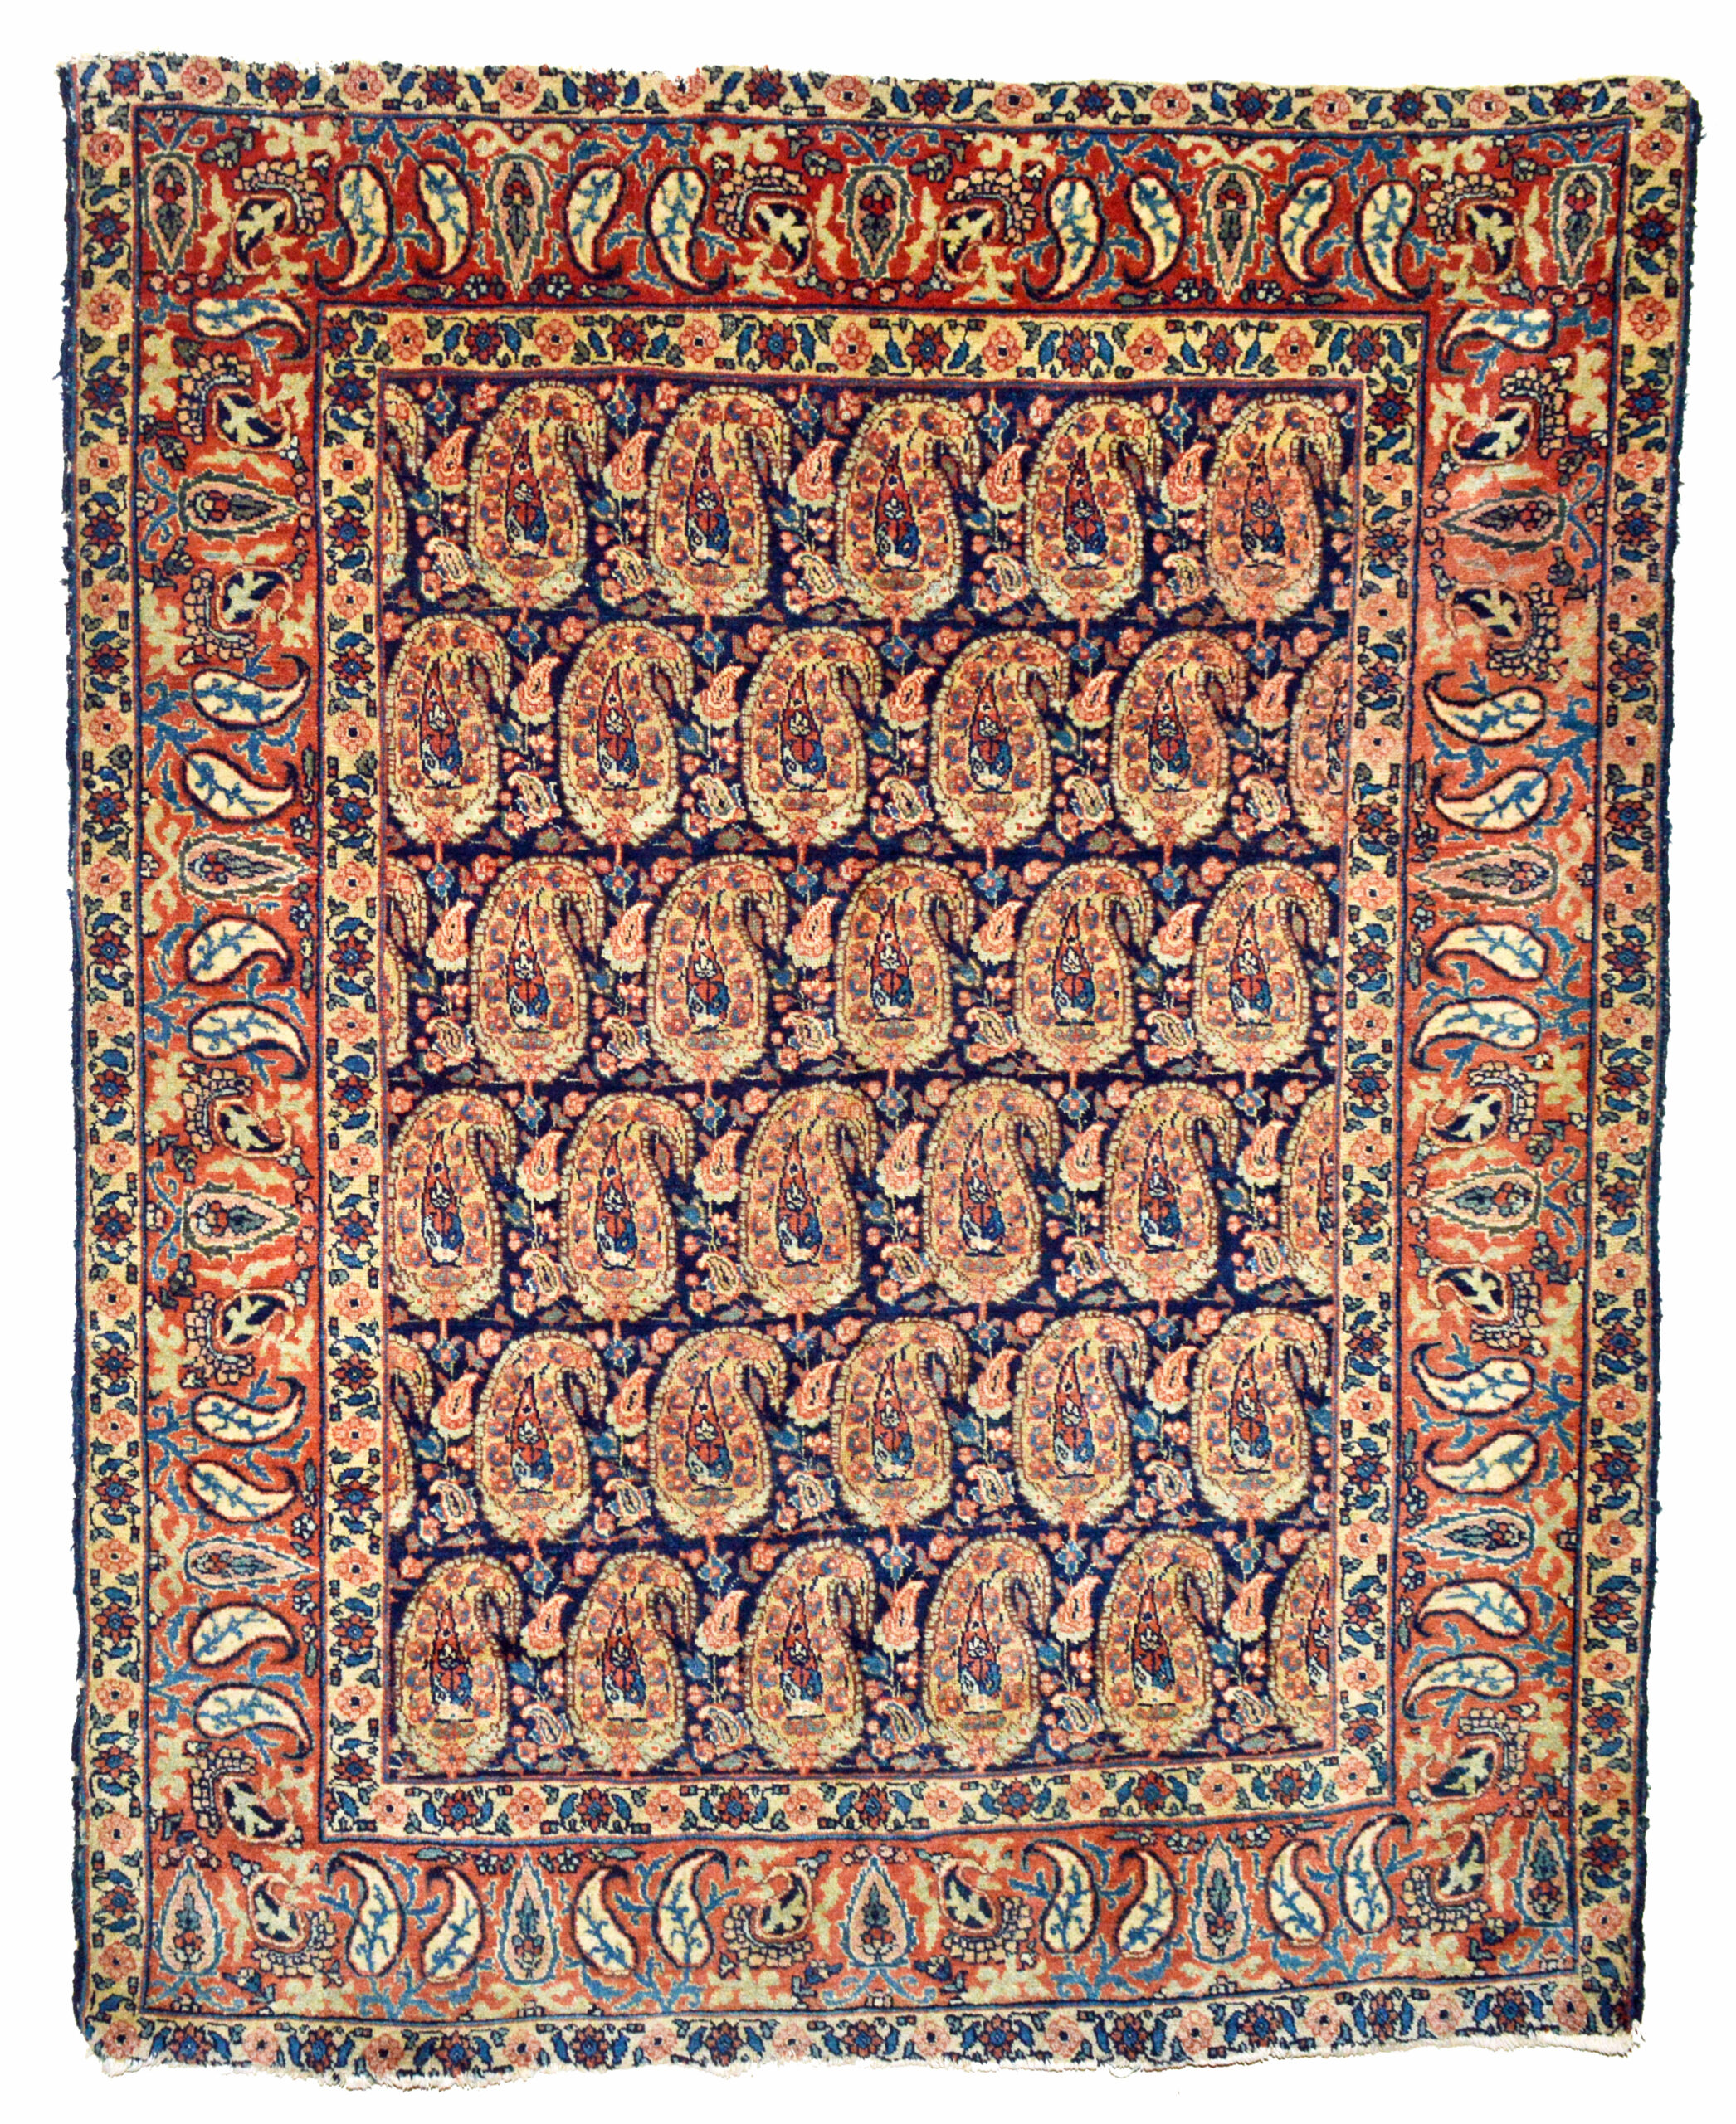 A finely woven Afshar tribal rug, probably from the Kerman area in south Persia, circa 1910. The navy field is decorated with large Boteh (Paisley shape motifs) and framed by a terra cotta color border - Douglas Stock Gallery, antique tribal rugs